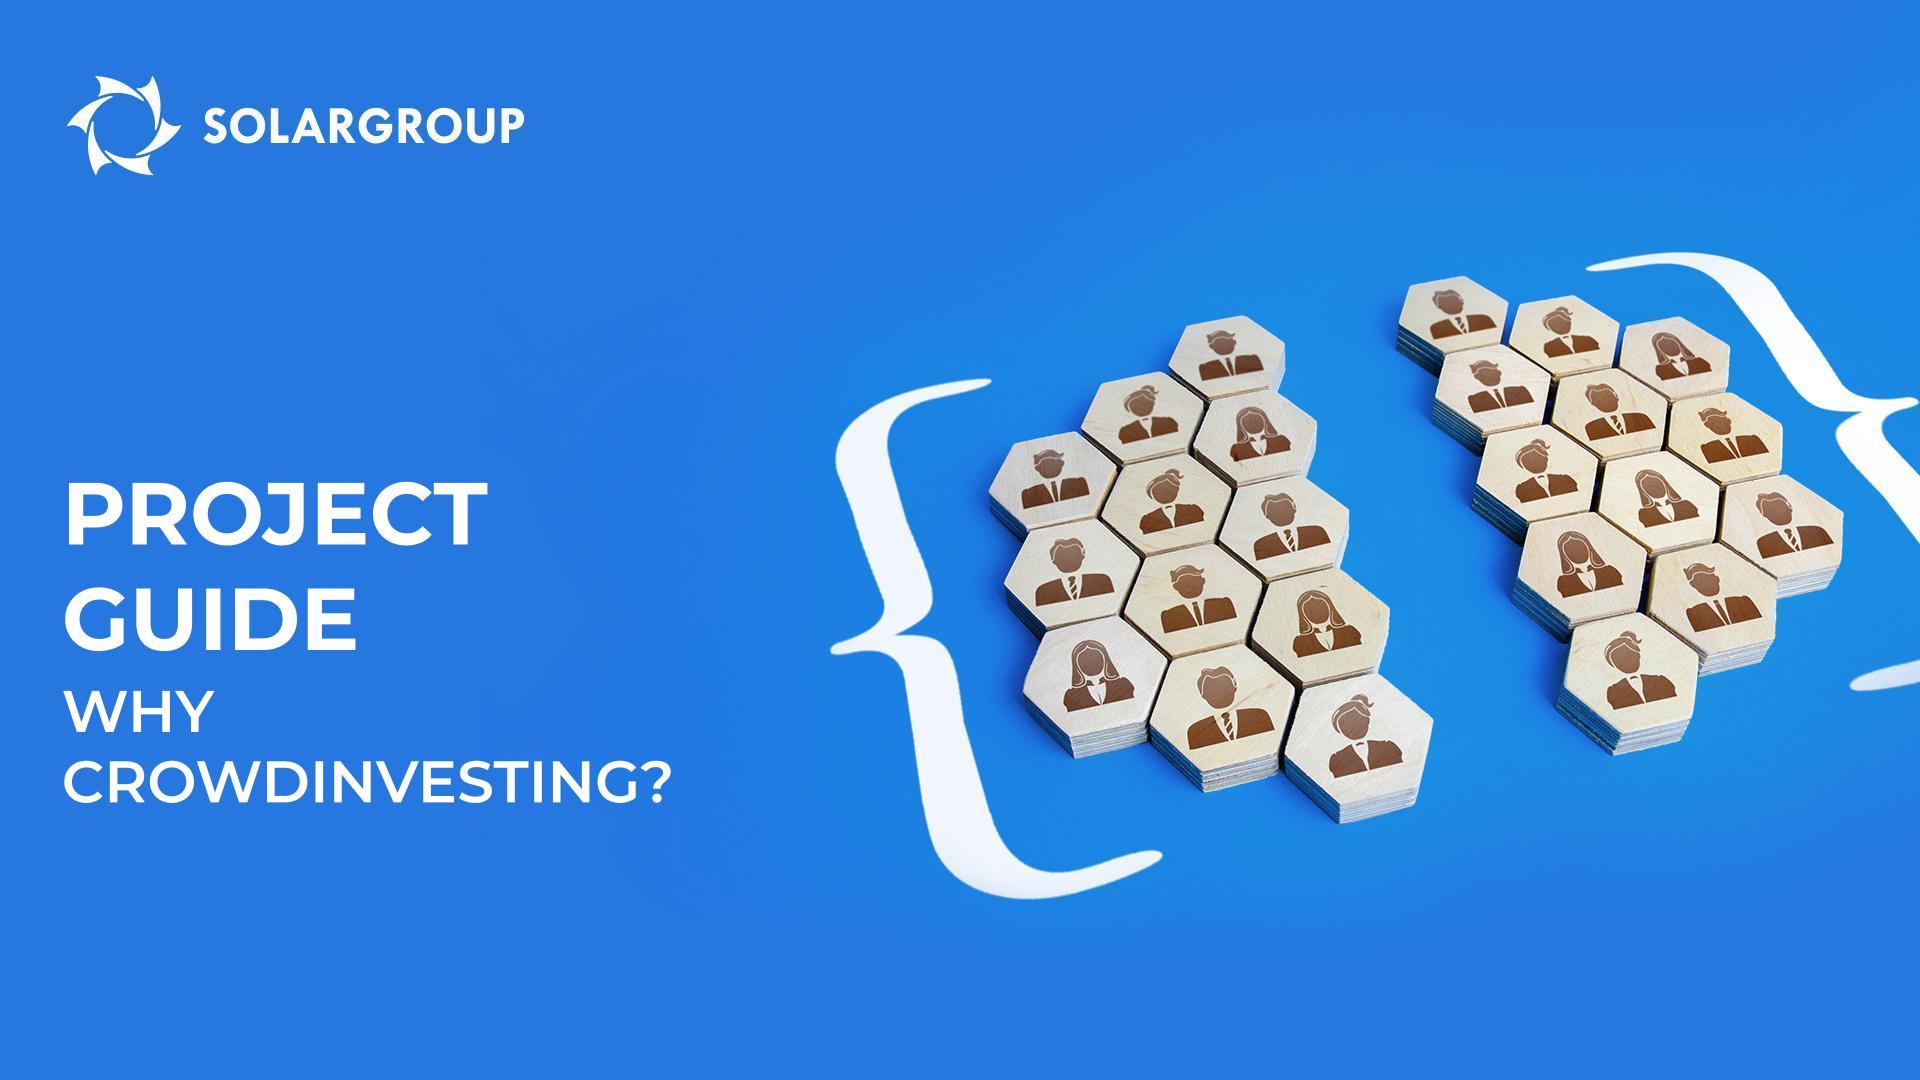 Project guide: Why has crowdinvesting been chosen as a funding method?